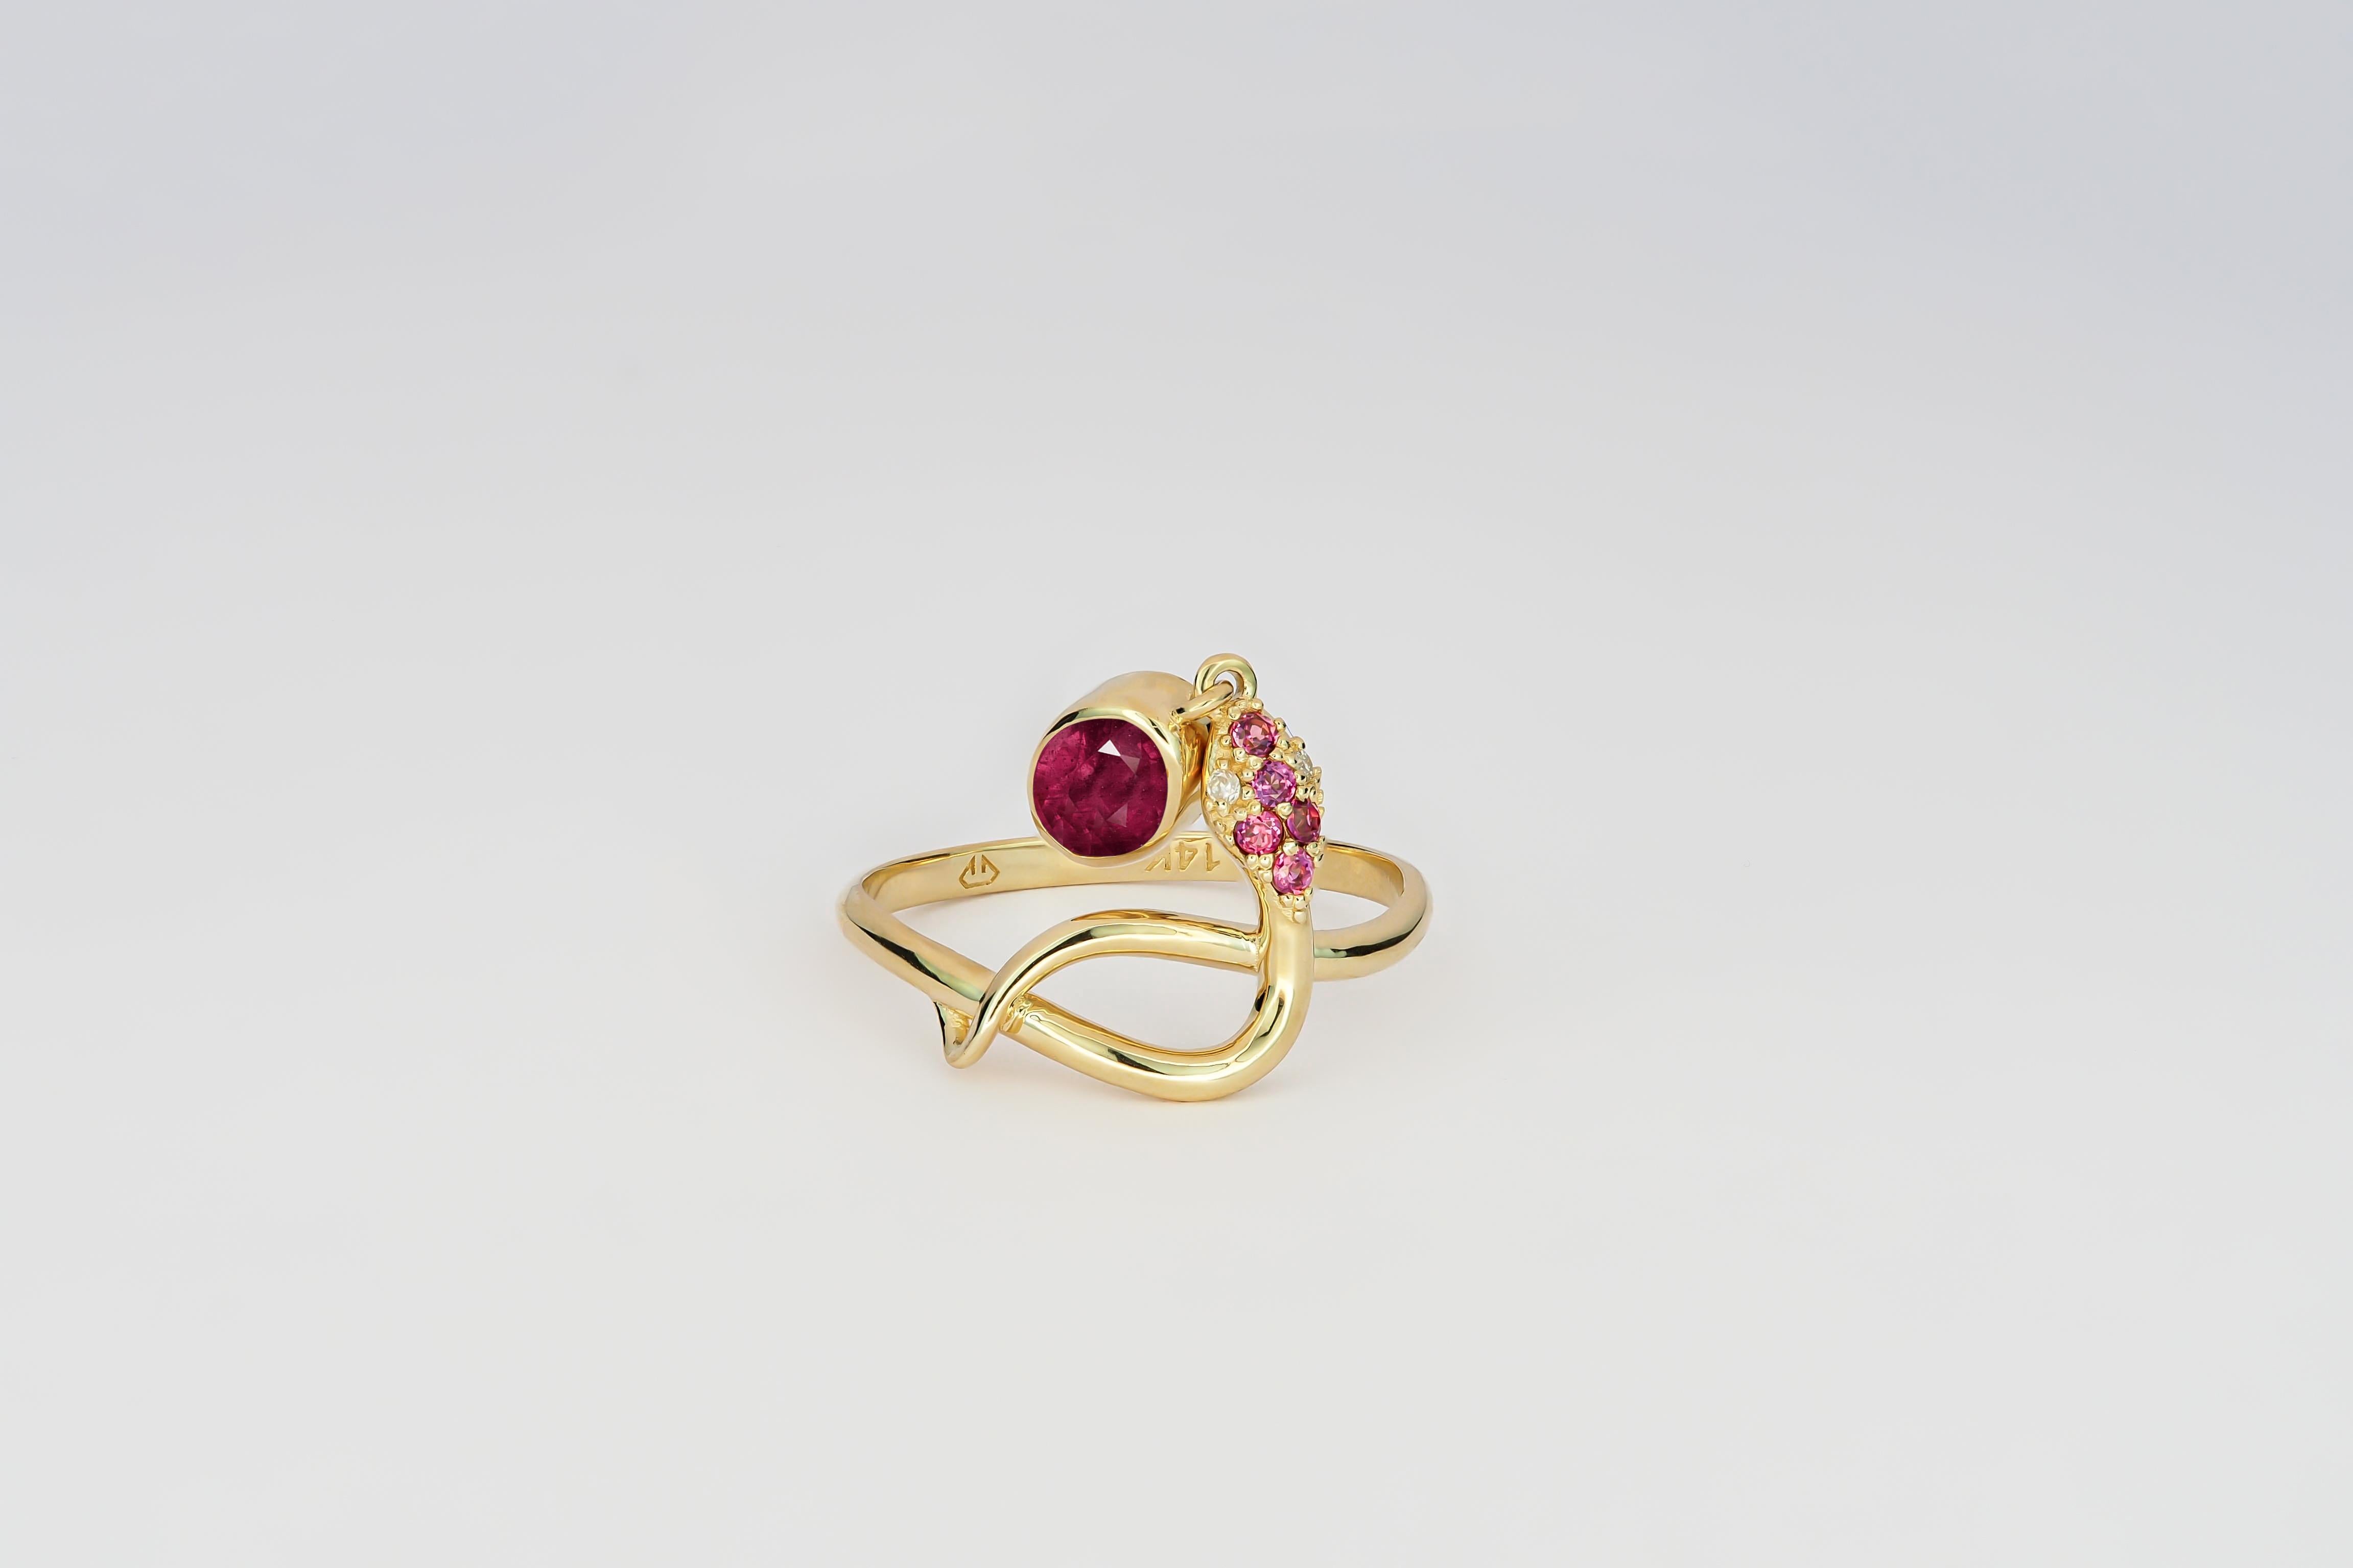 Snake ring with Ruby. Ruby gold ring. Snake gold ring. Genuine Ruby ring. Oval Ruby ring. July birthstone ring. Ruby vintage ring. 
14k yellow gold ring with blue Ruby, rose sapphires and diamonds. 

Metal: 14k gold.
Weight: 2.25 g. depends from